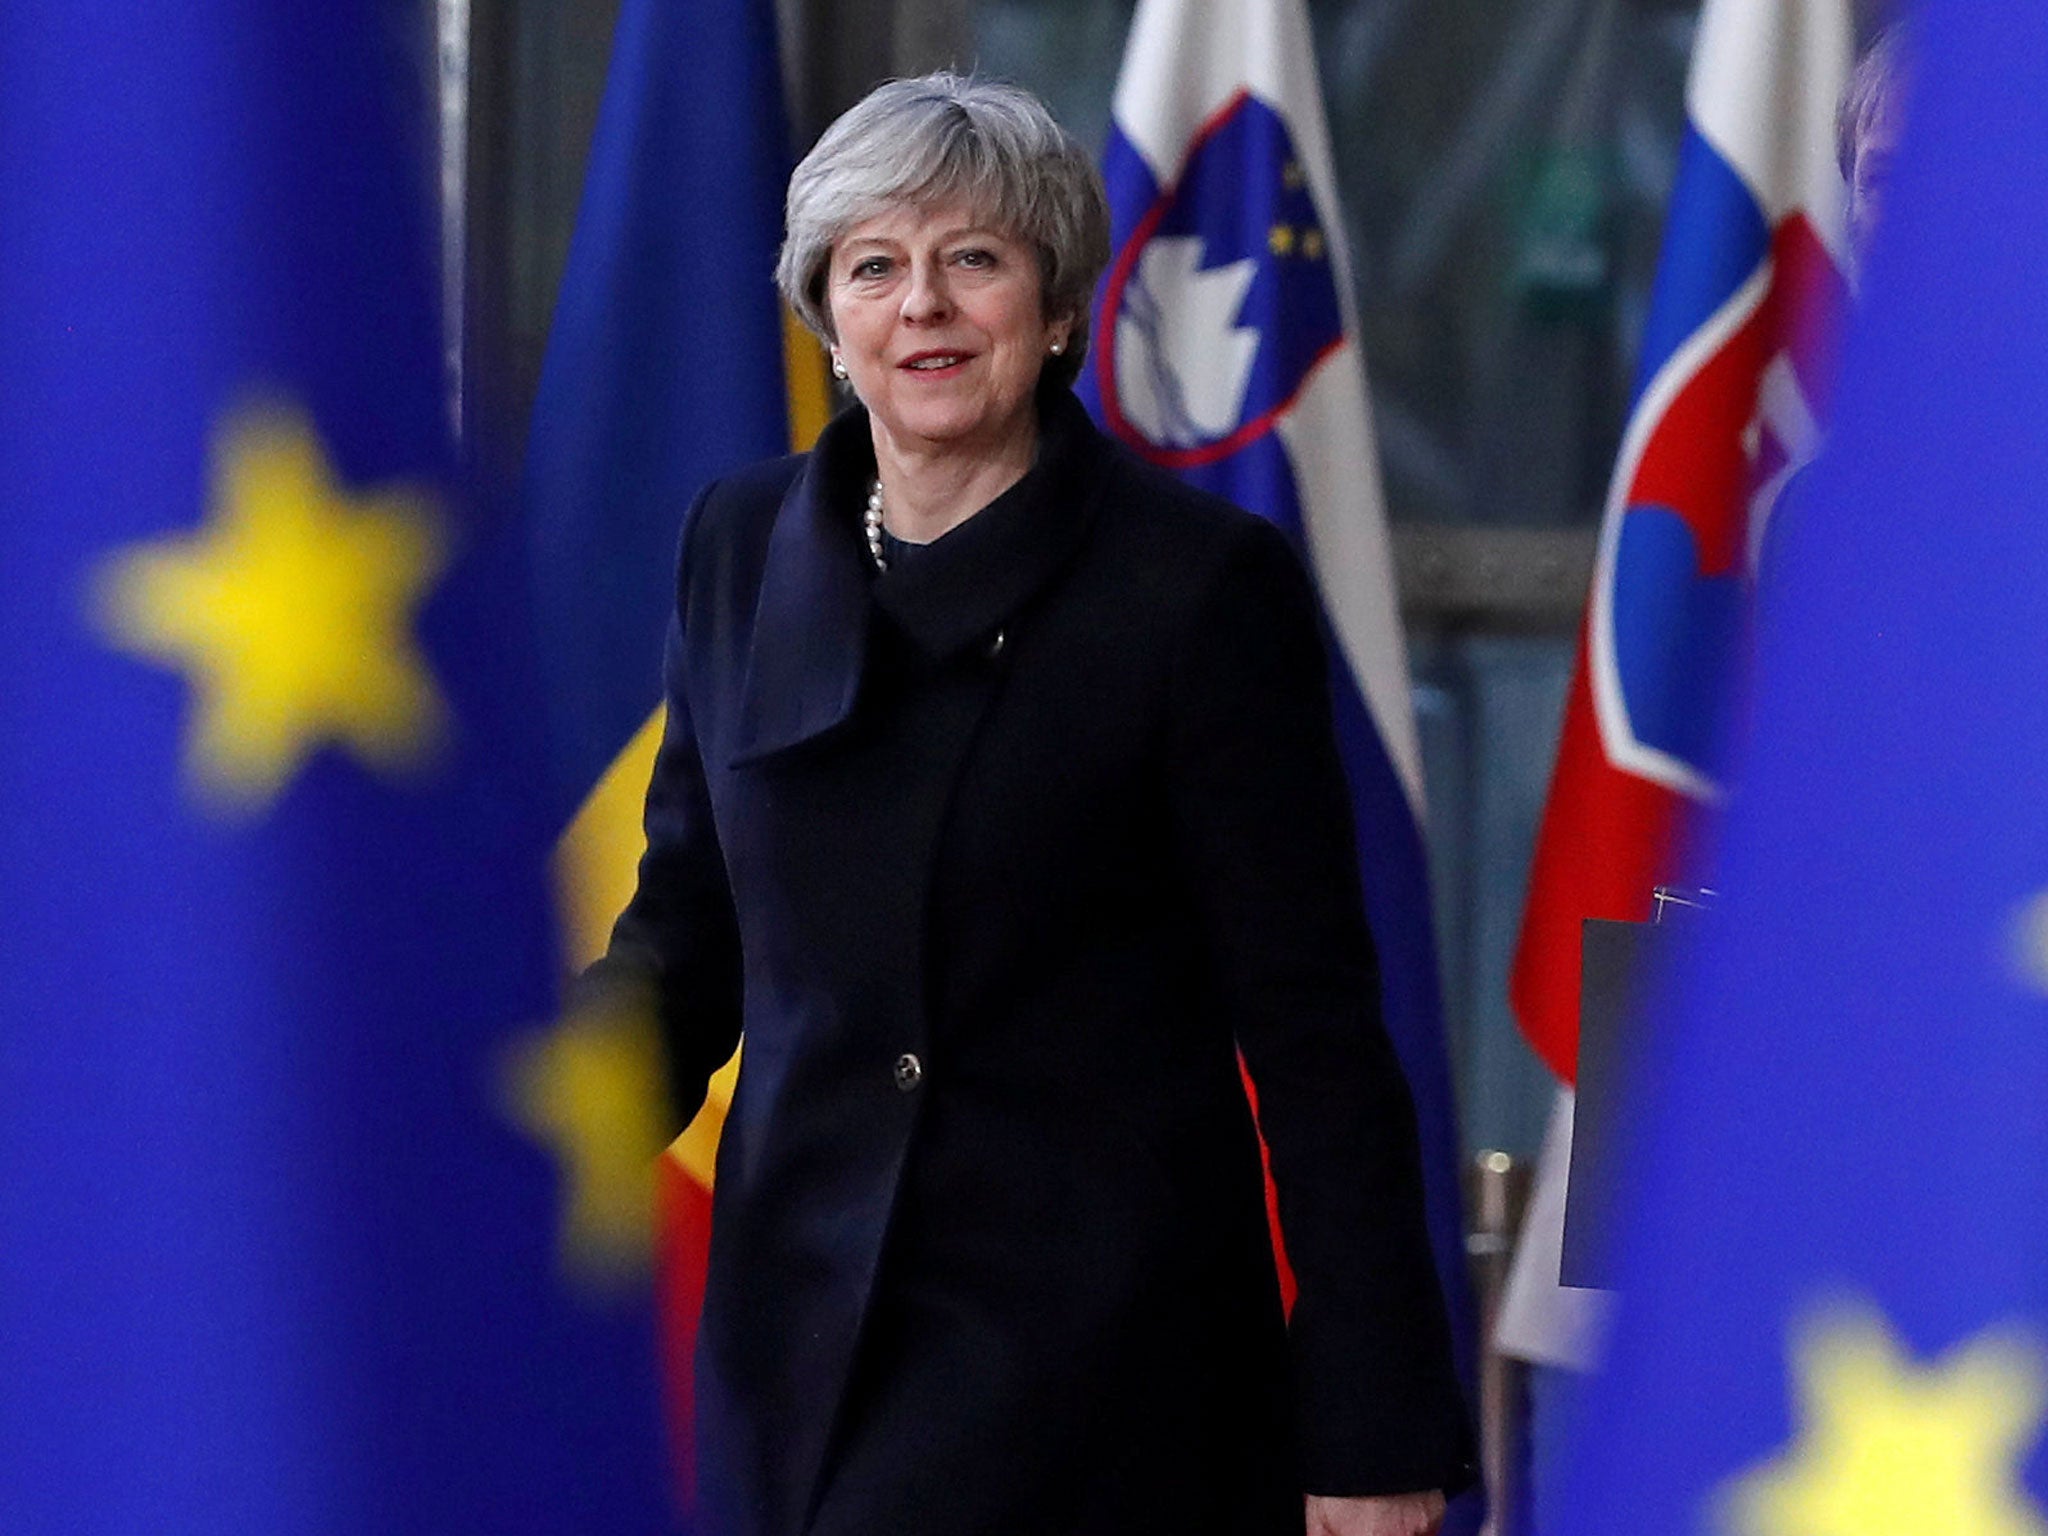 Theresa May arrives for the European Union summit in Brussels